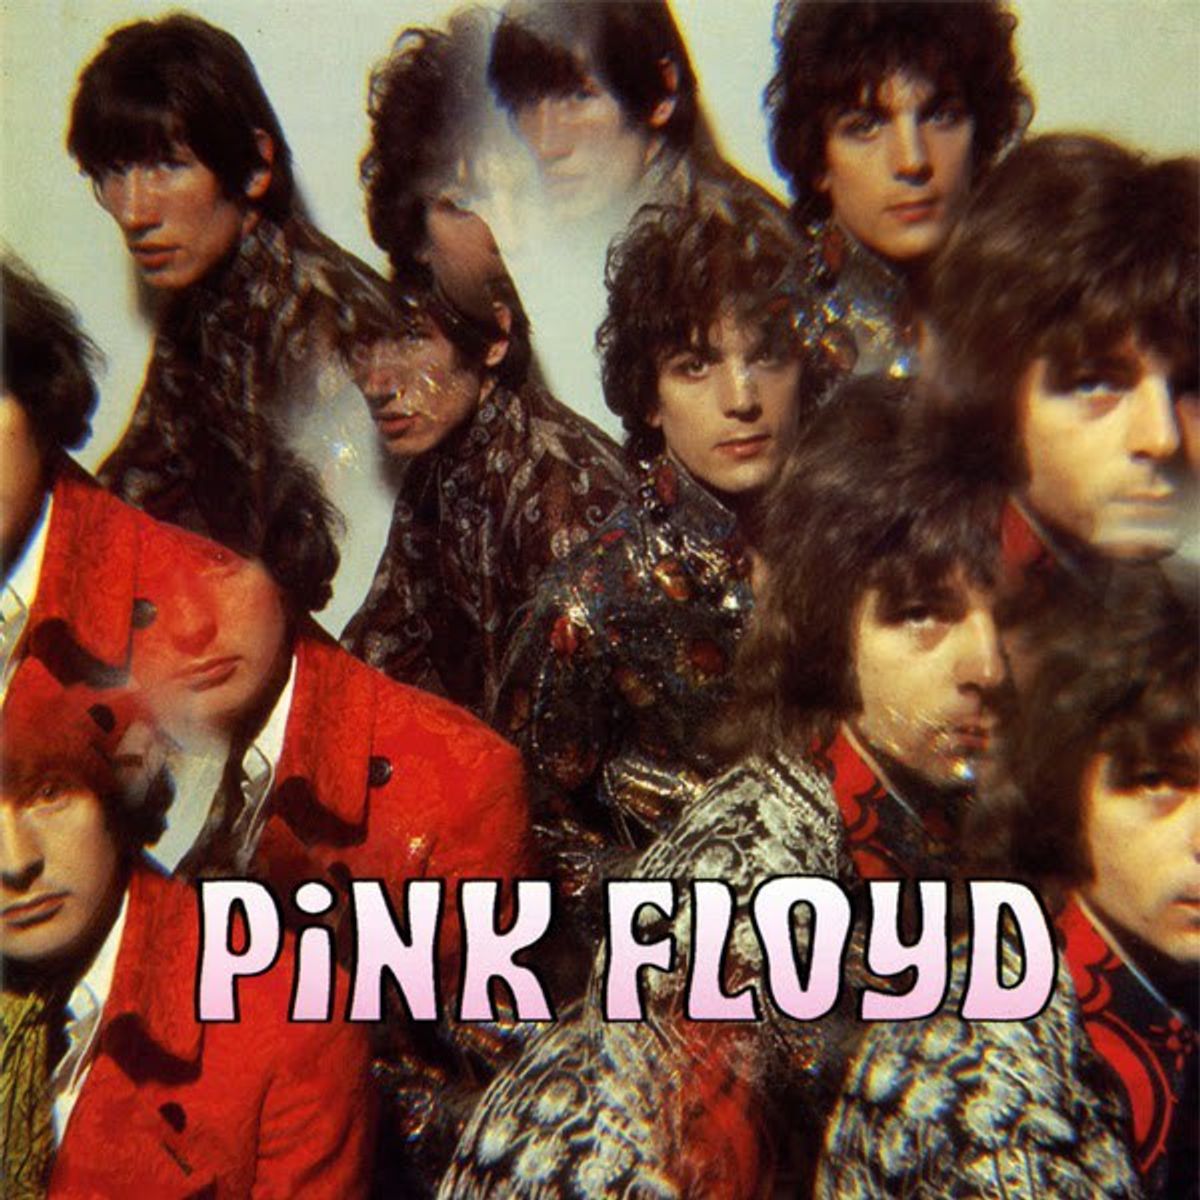 Pink Floyd's "The Piper at the Gates of Dawn": A Psychedelic Adventure